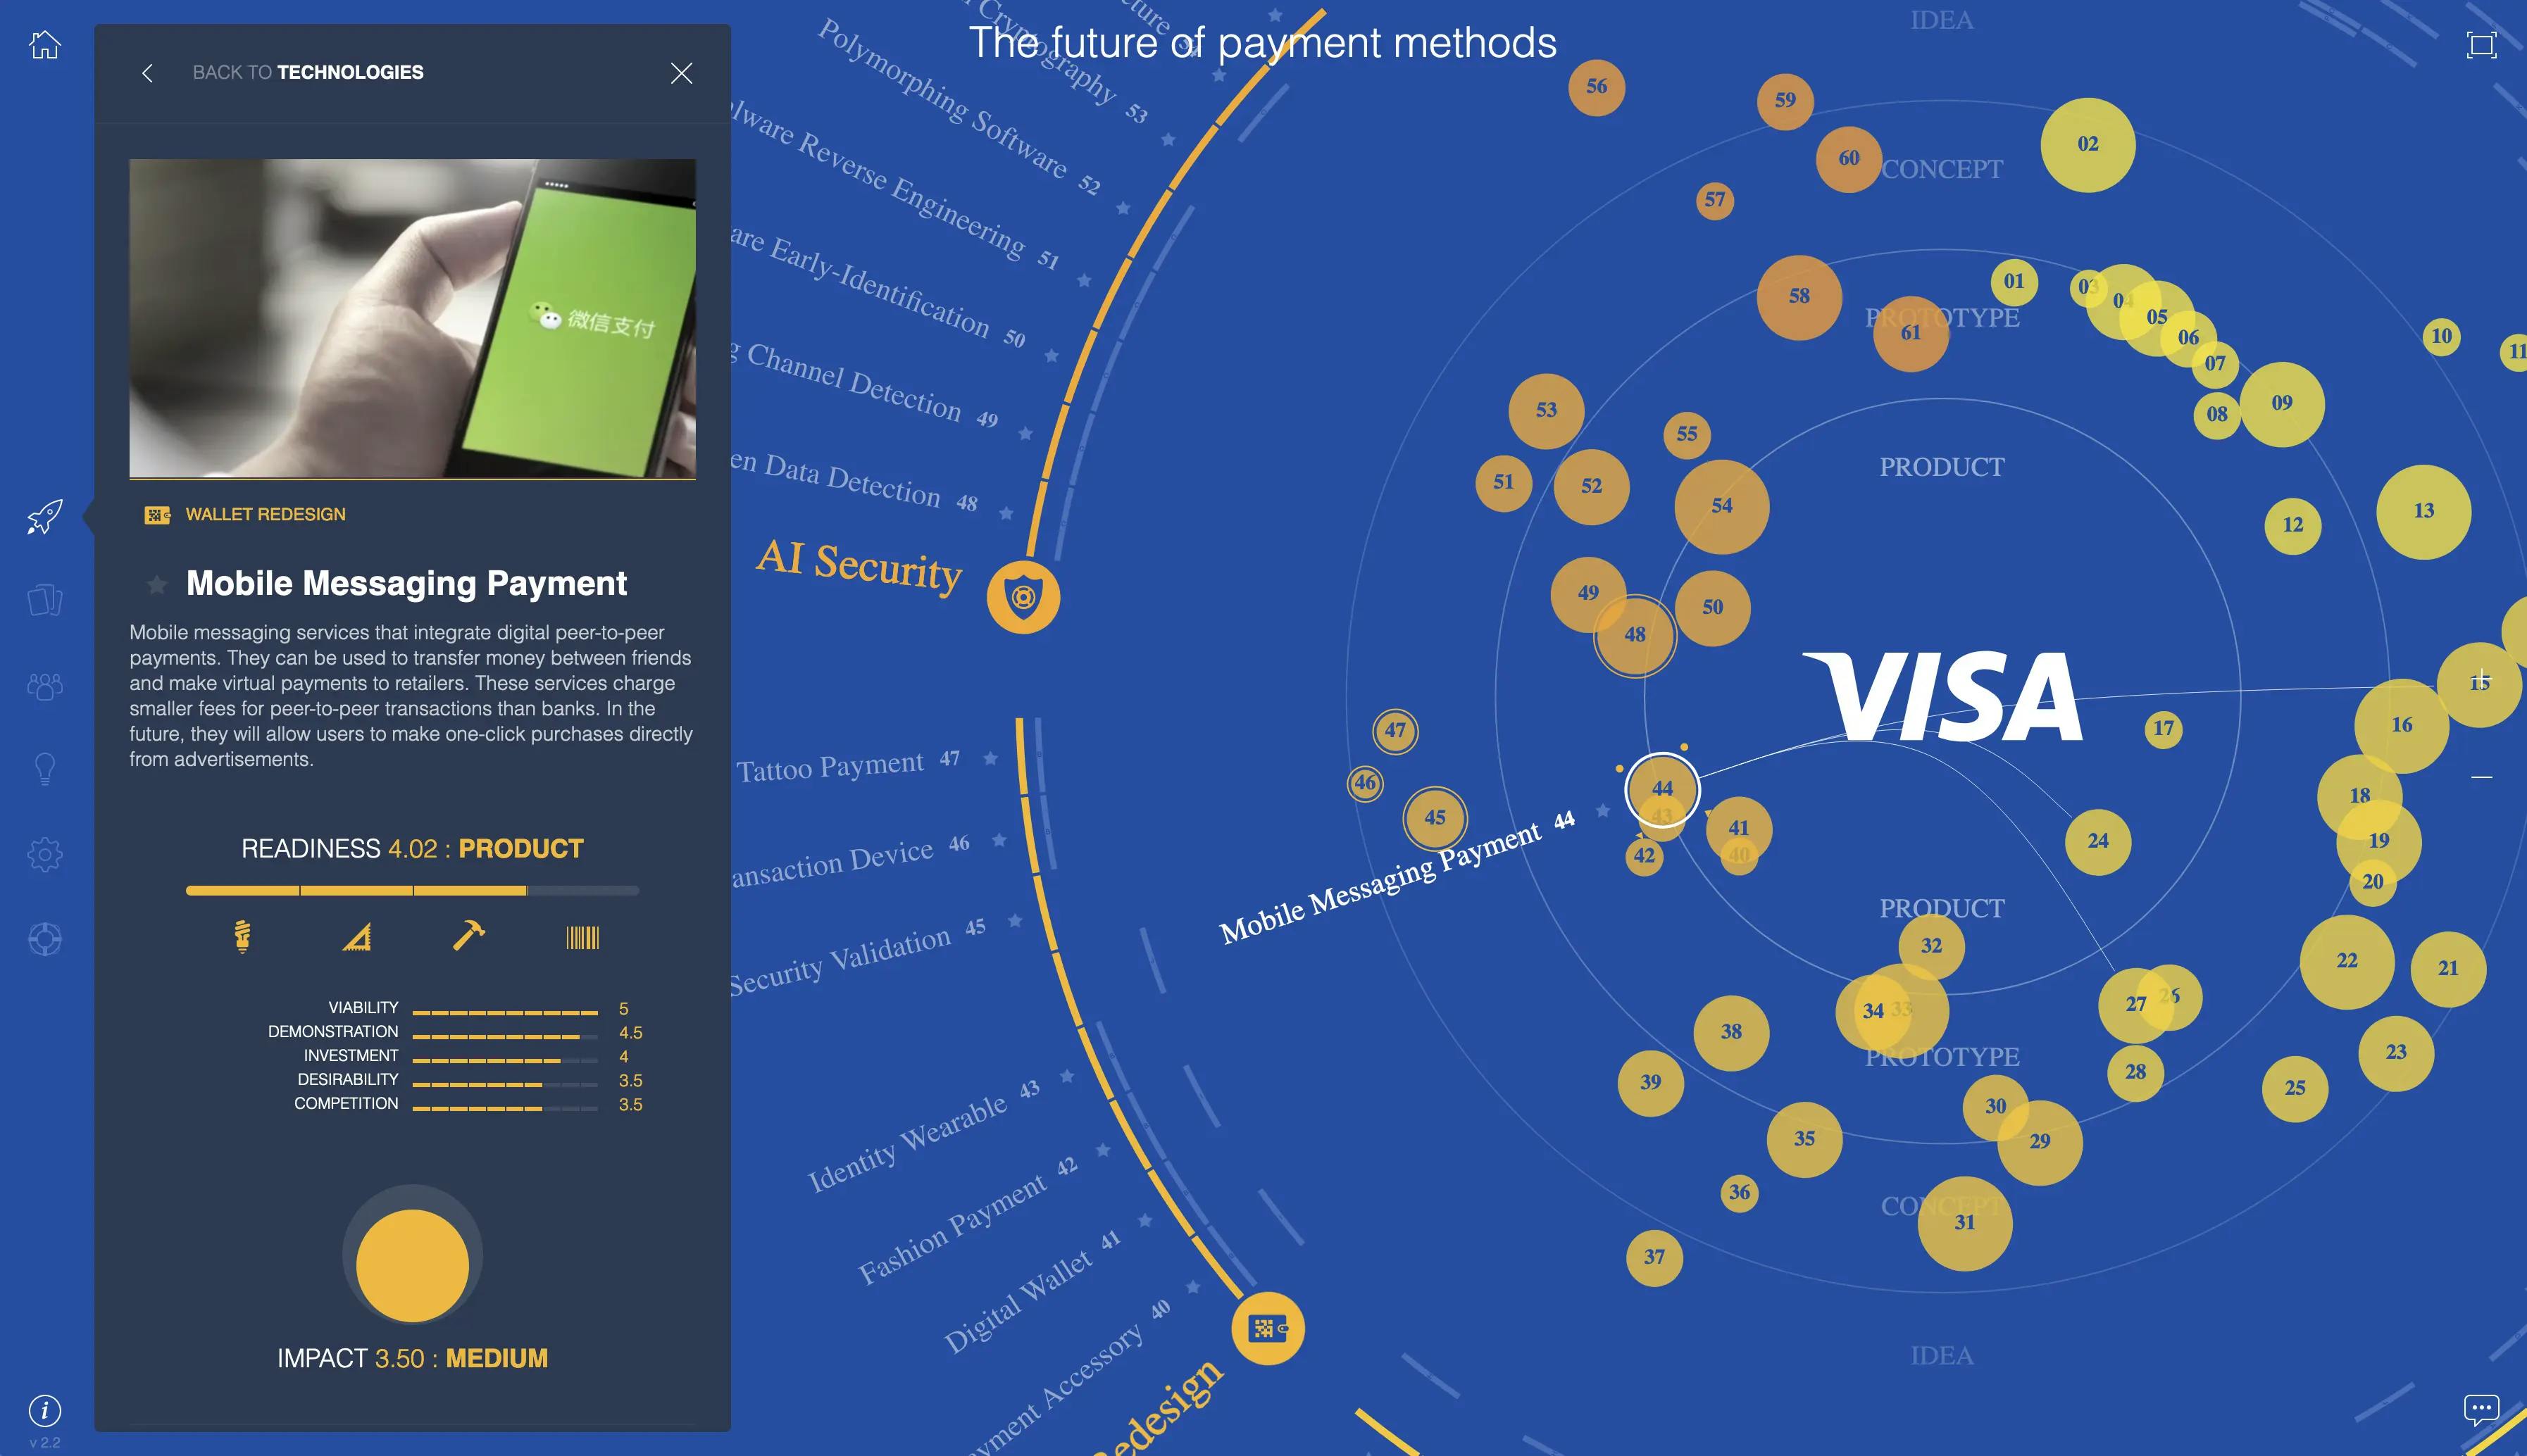 Envisioning the Future of Payments with Visa